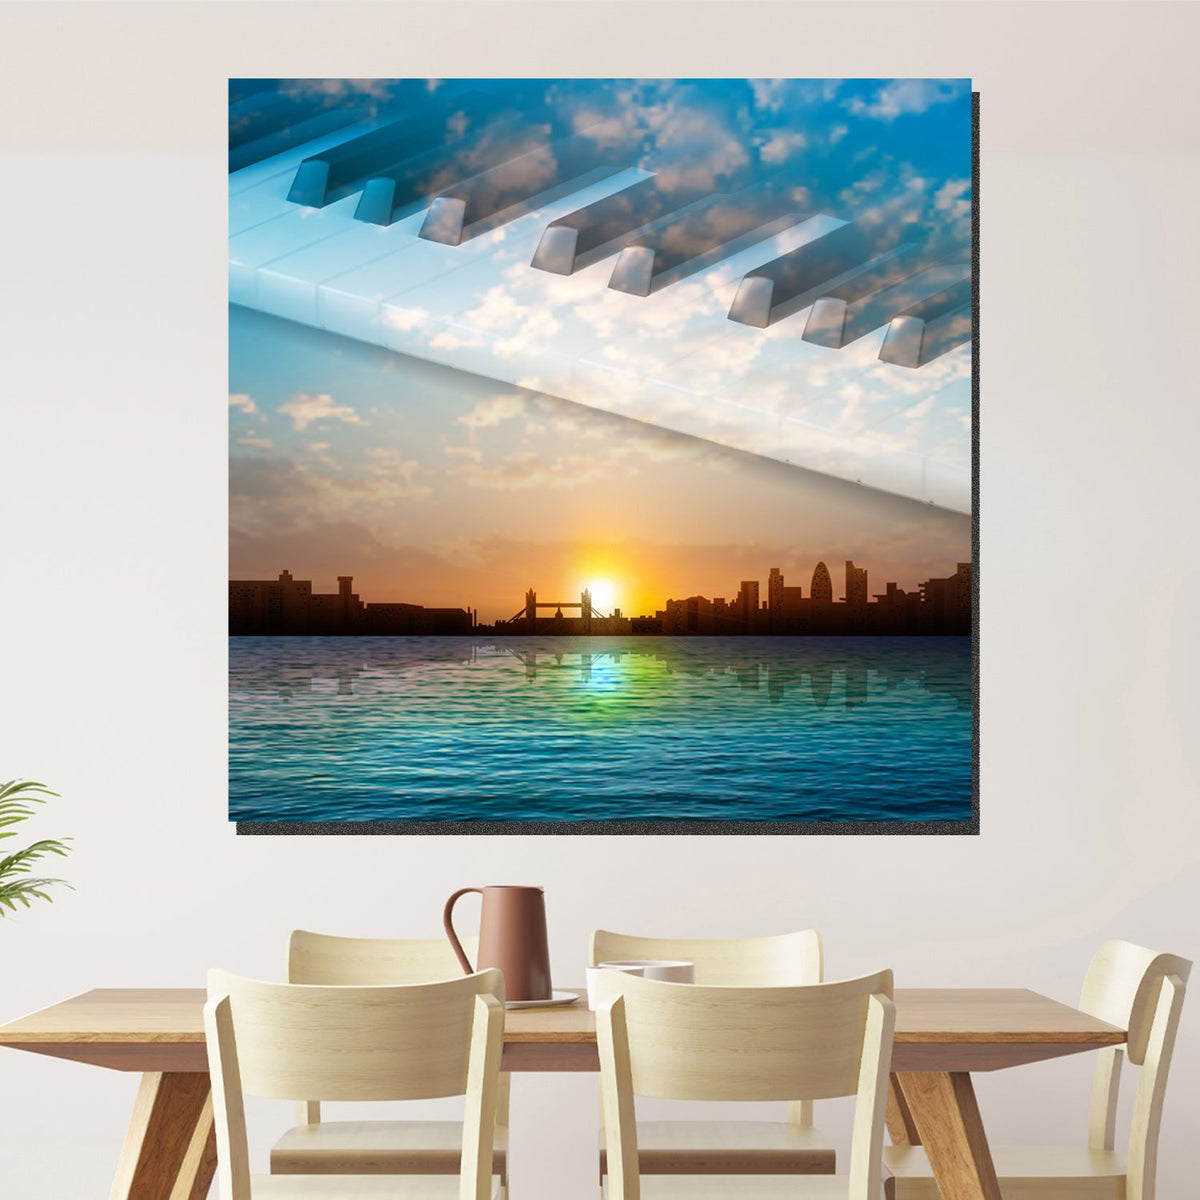 https://cdn.shopify.com/s/files/1/0387/9986/8044/products/LondonSkylinePianoCanvasArtprintStretched-3.jpg